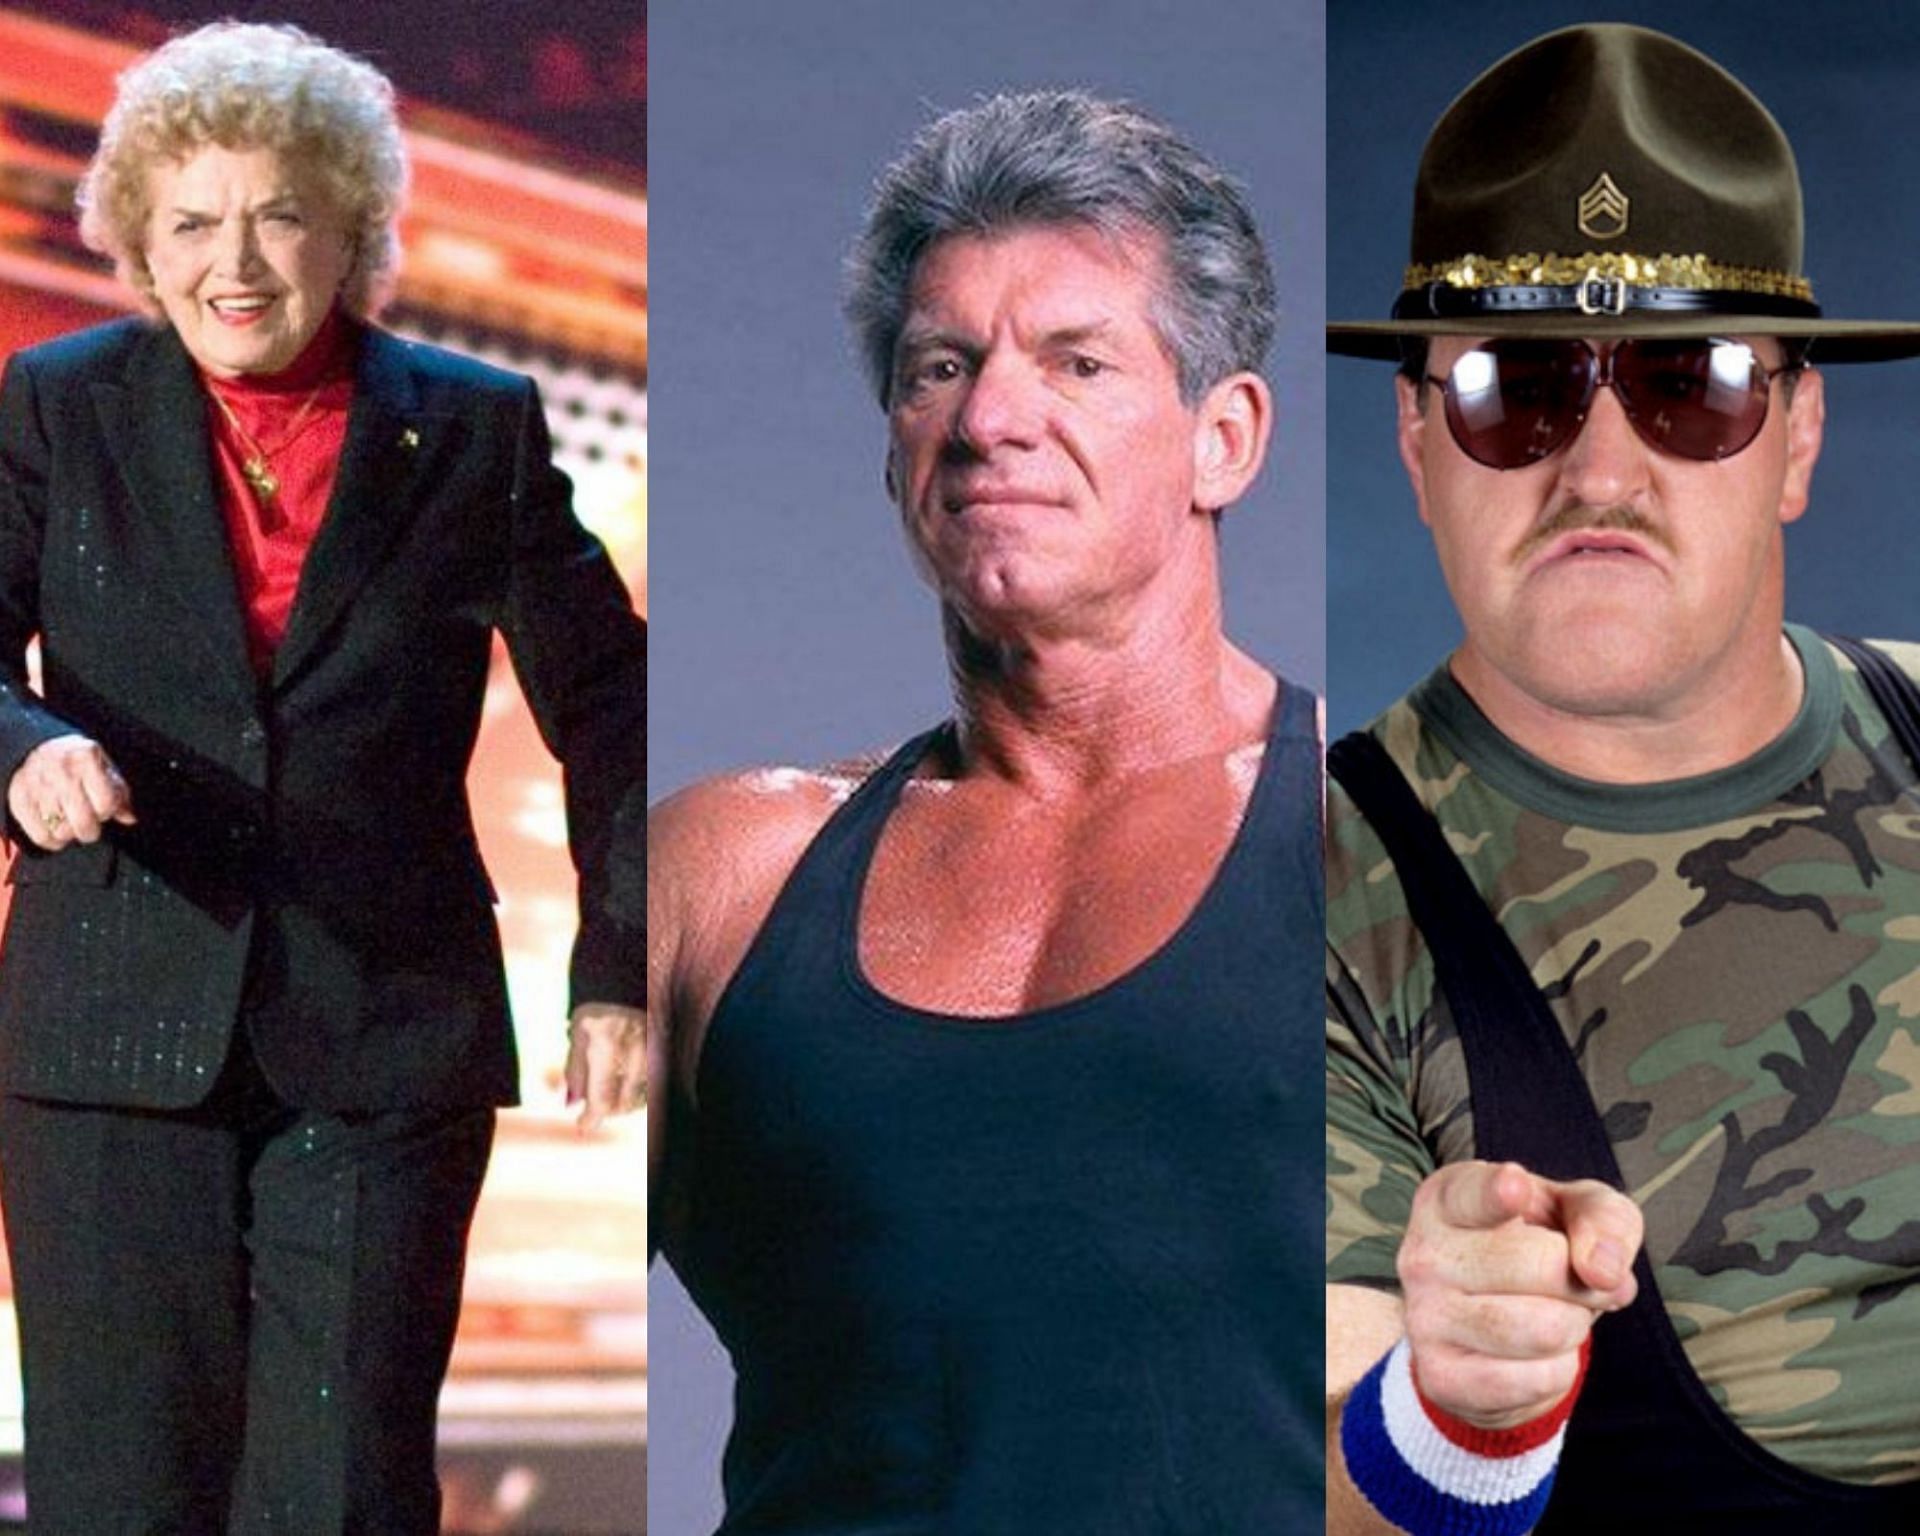 Some WWE Superstars defy the aging process